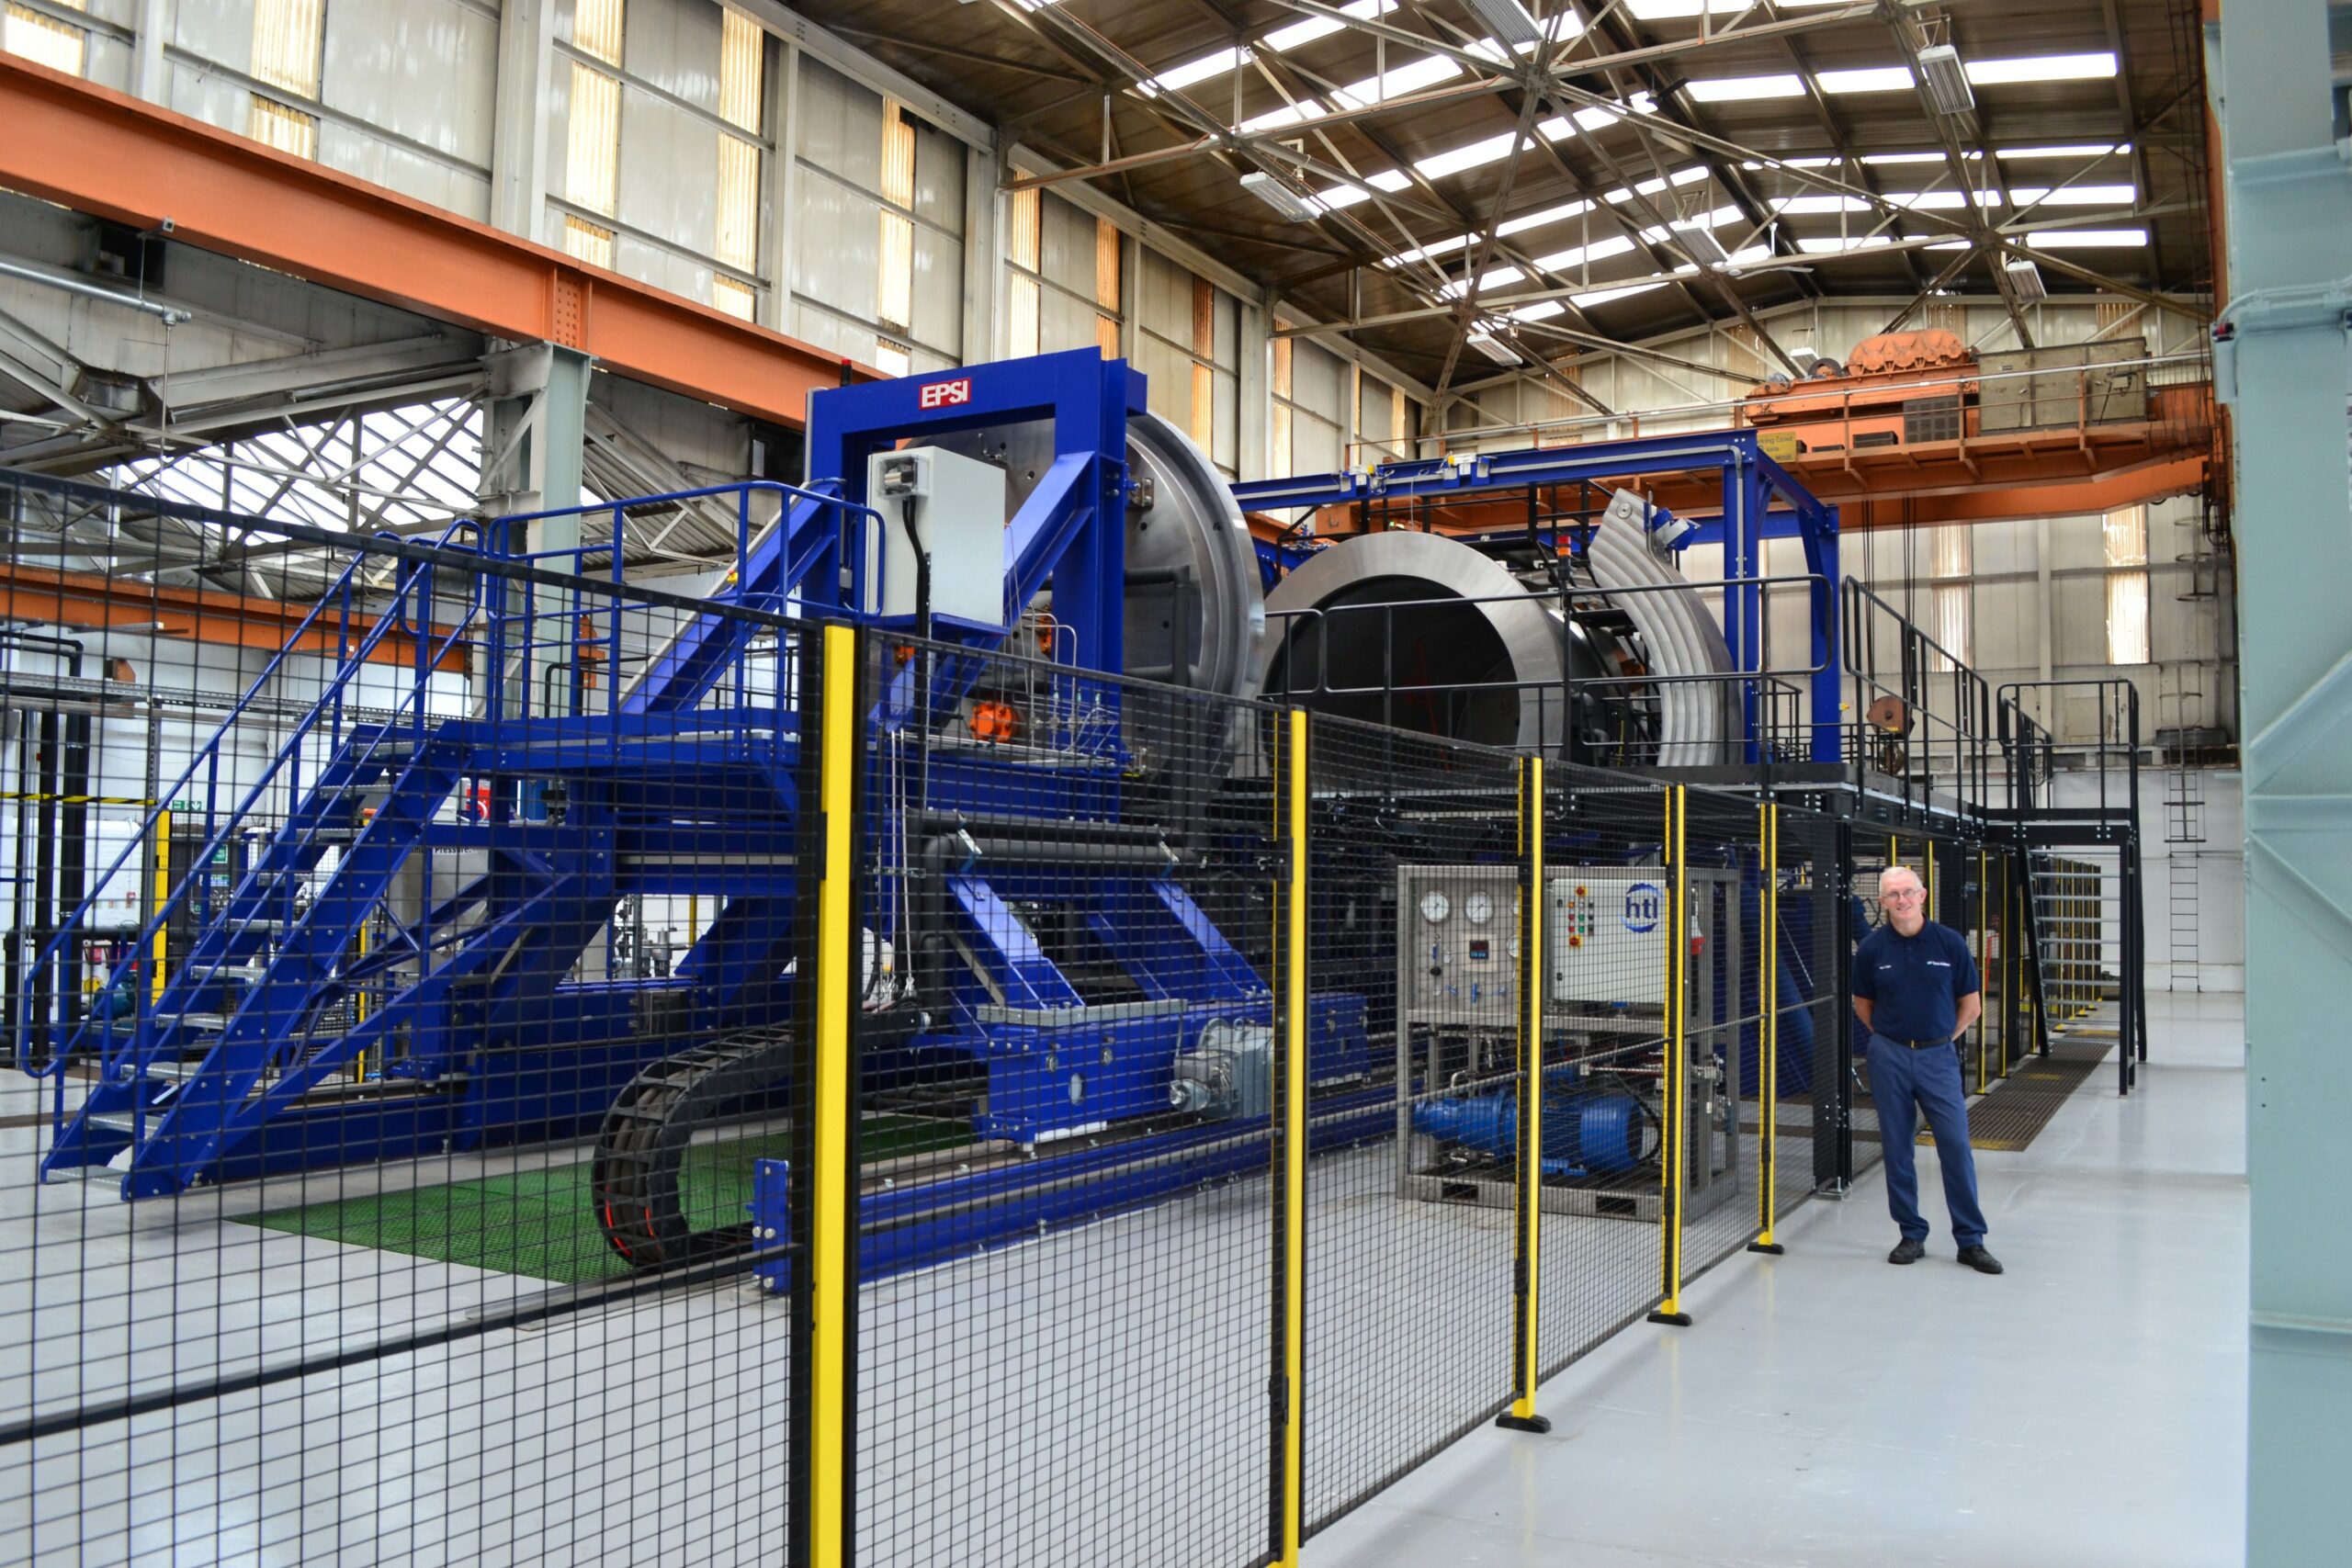 Multi-Million Pound Pressure Testing Facility Completes First Commercial Test